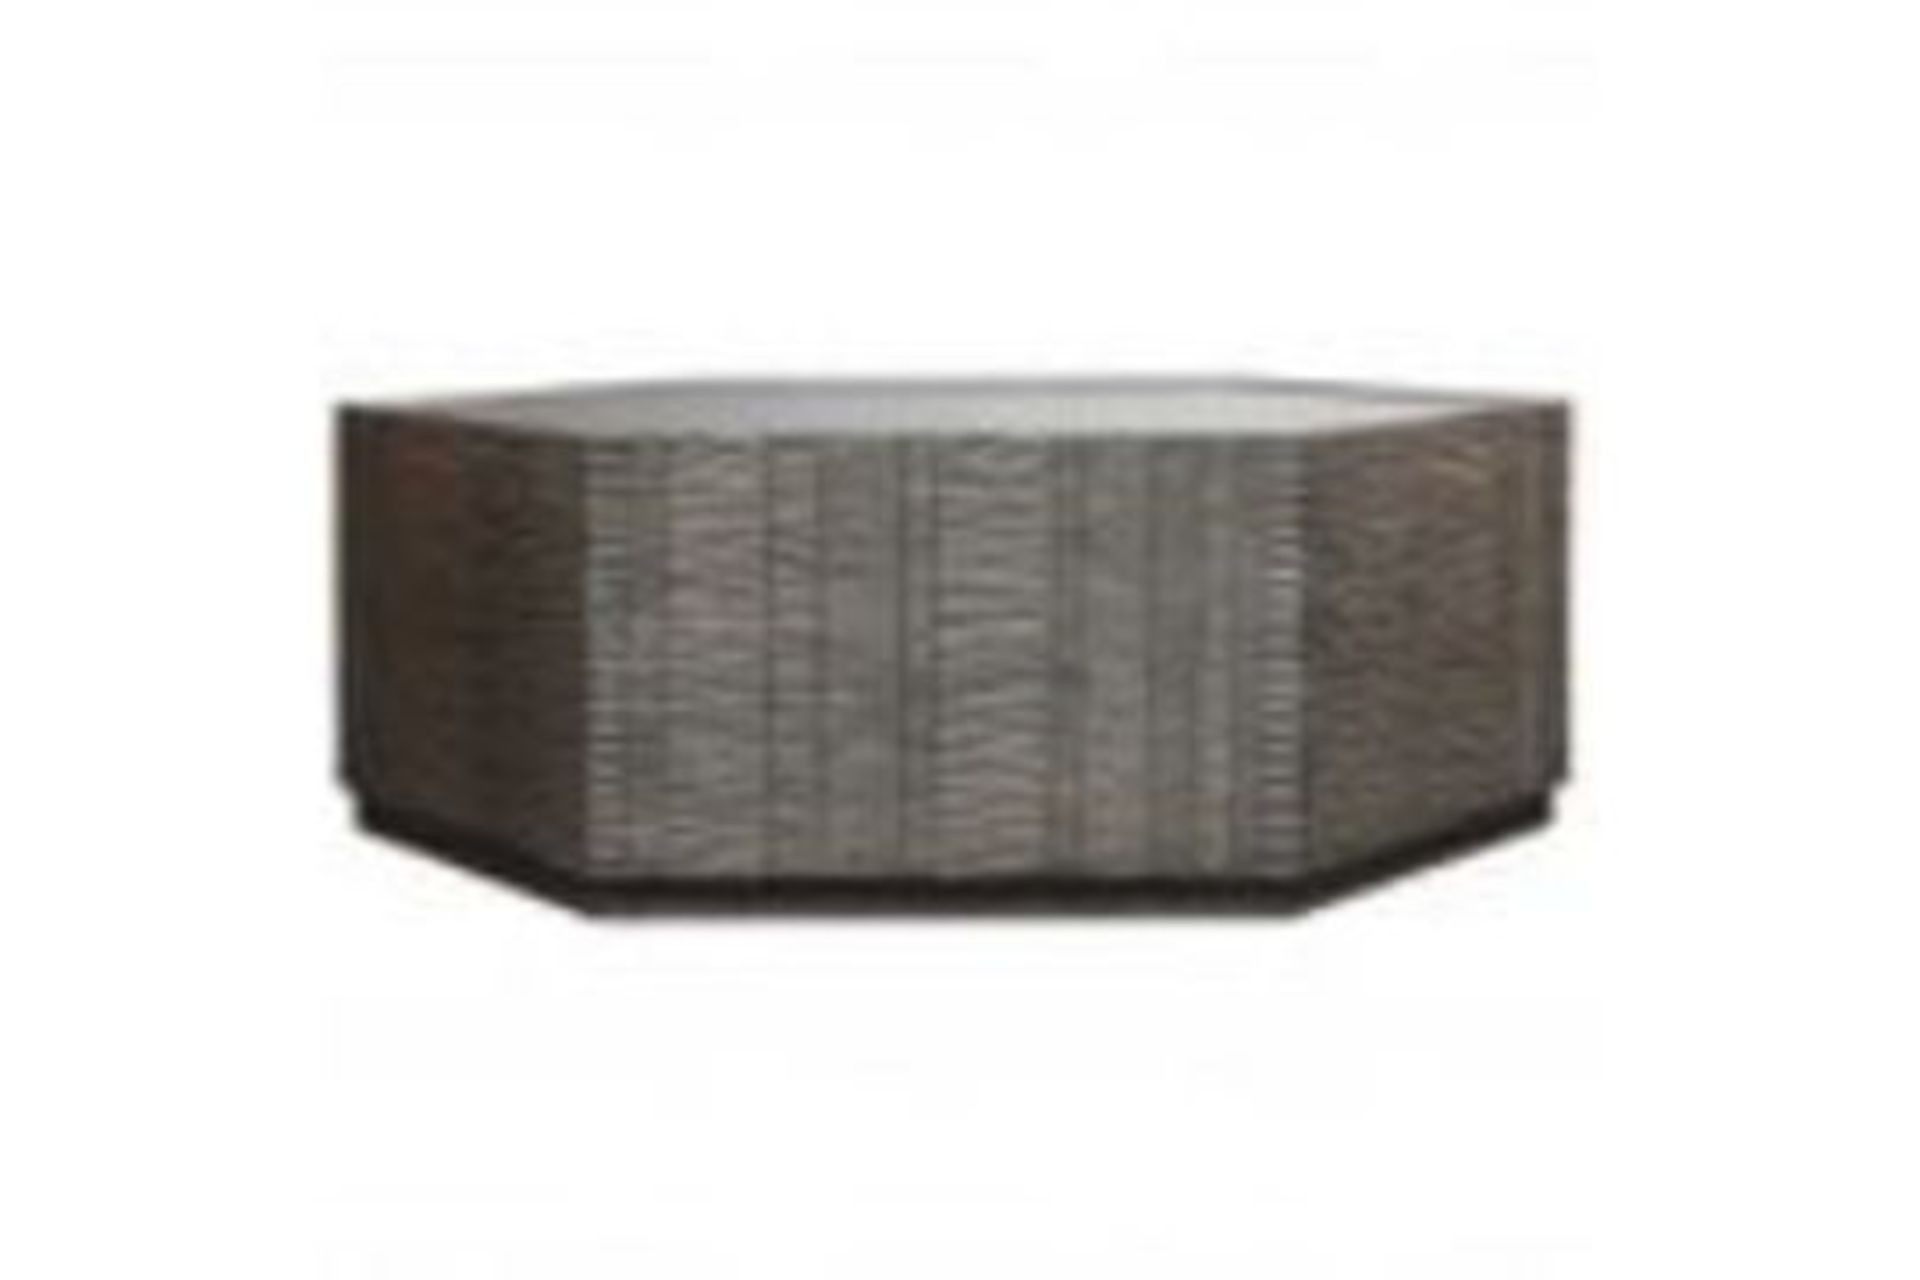 Aztek Coffee Table Is The Latest Addition In Our Range Of Modern And Contemporary Furniture Finished - Image 2 of 2